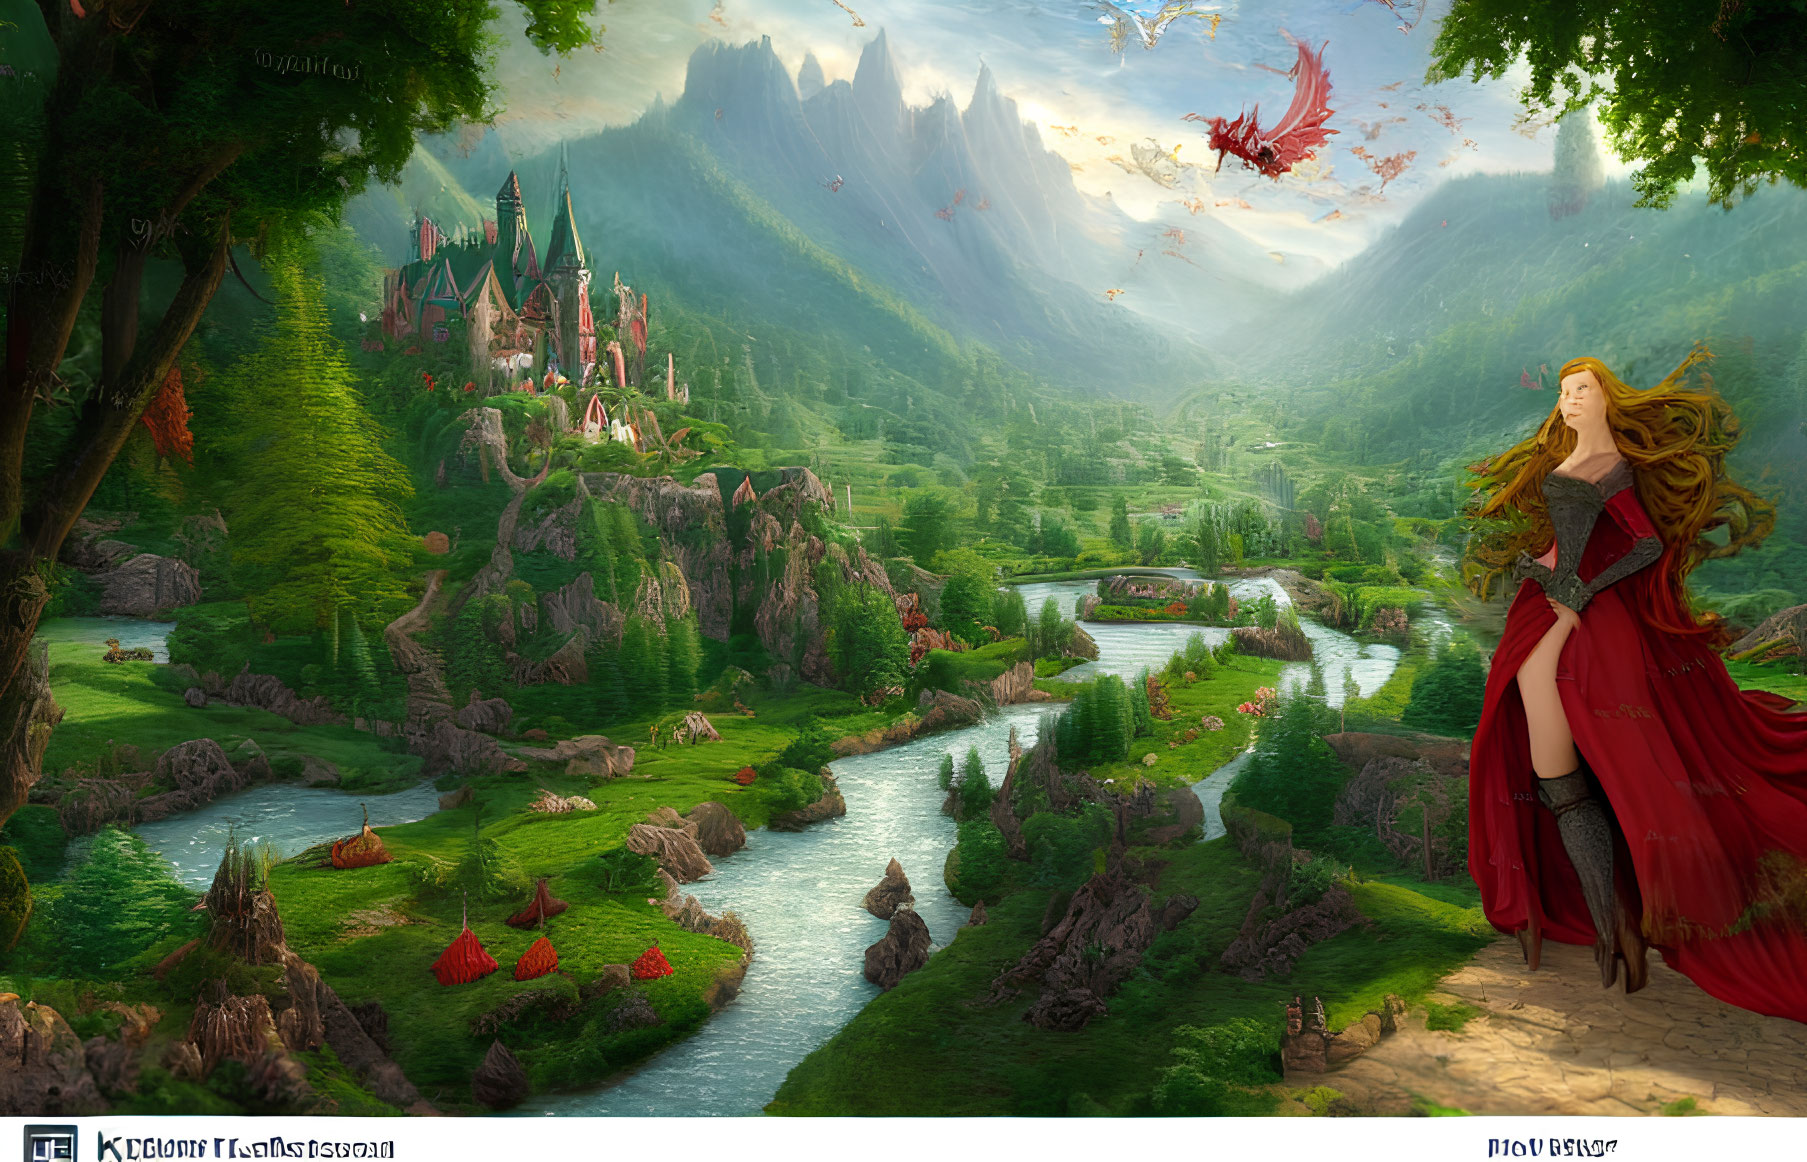 Fantasy landscape with castle, mountains, woman in red cloak, and dragons.